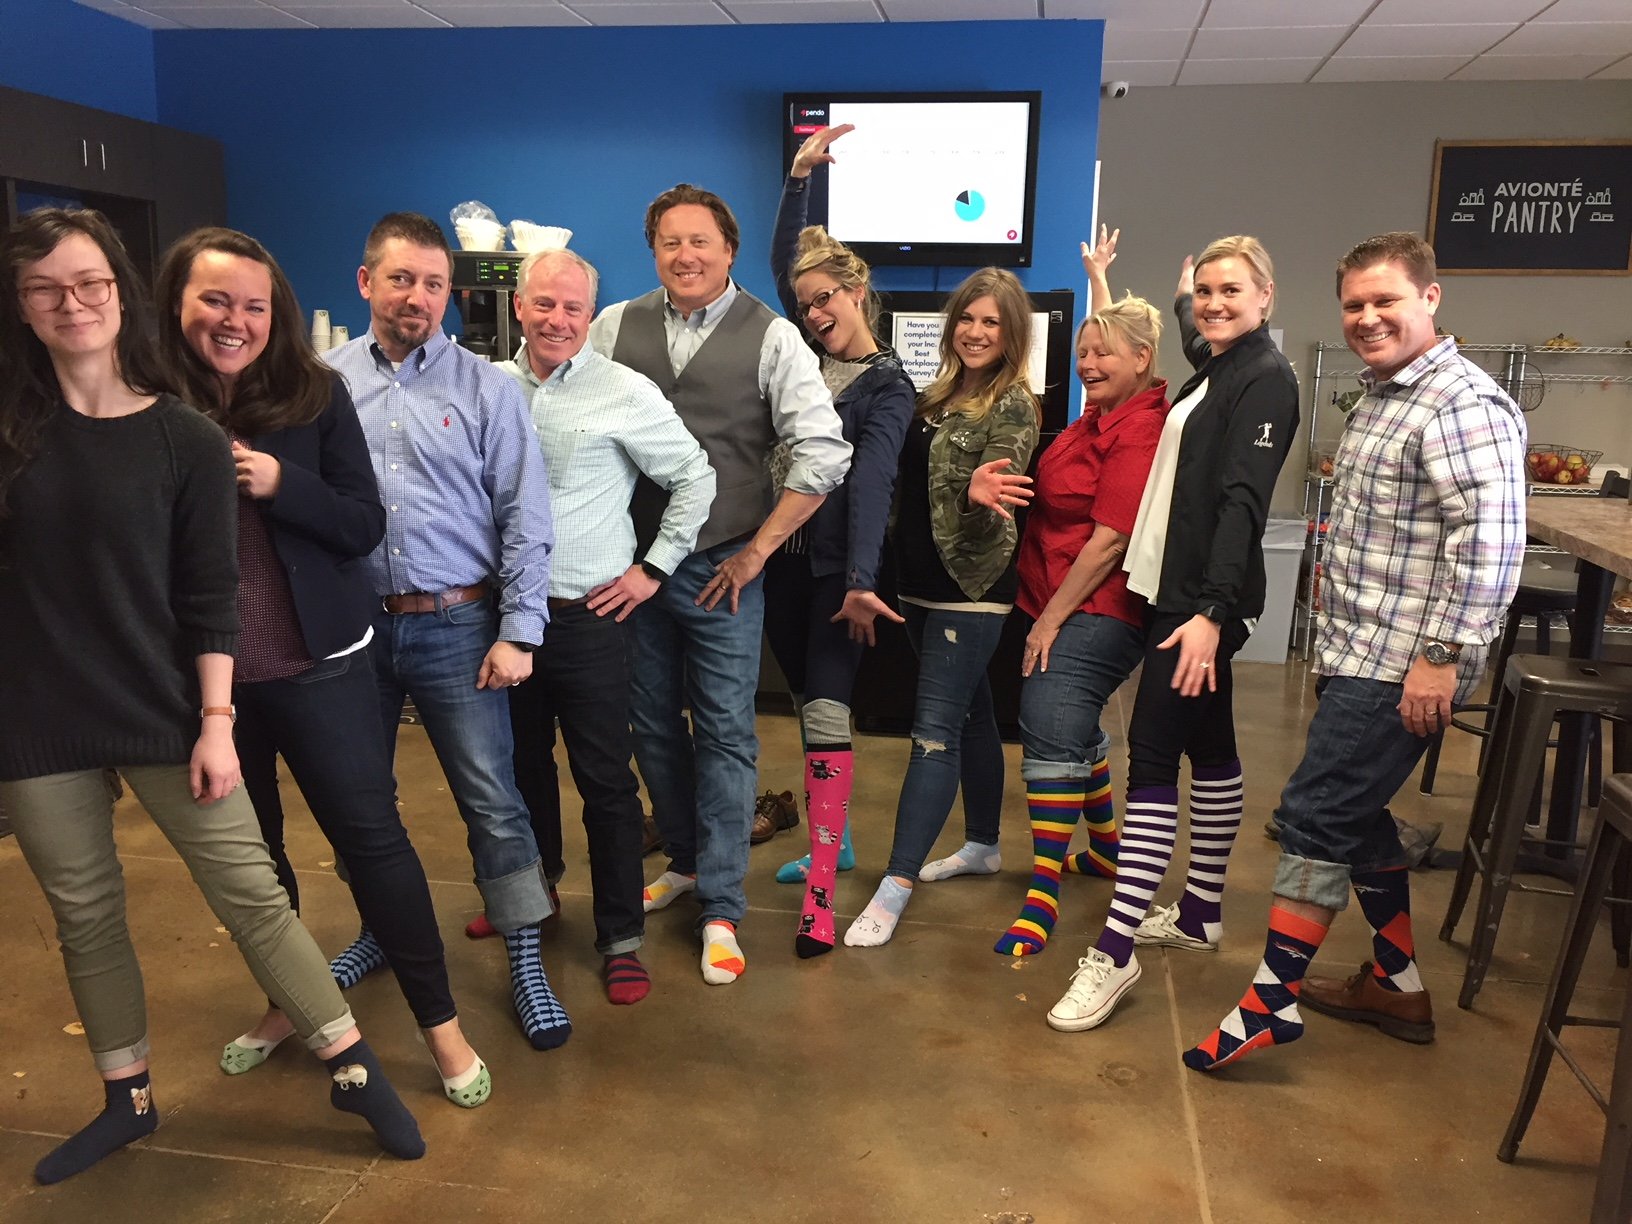 Avionté employees wearing silly socks and posing in the breakroom